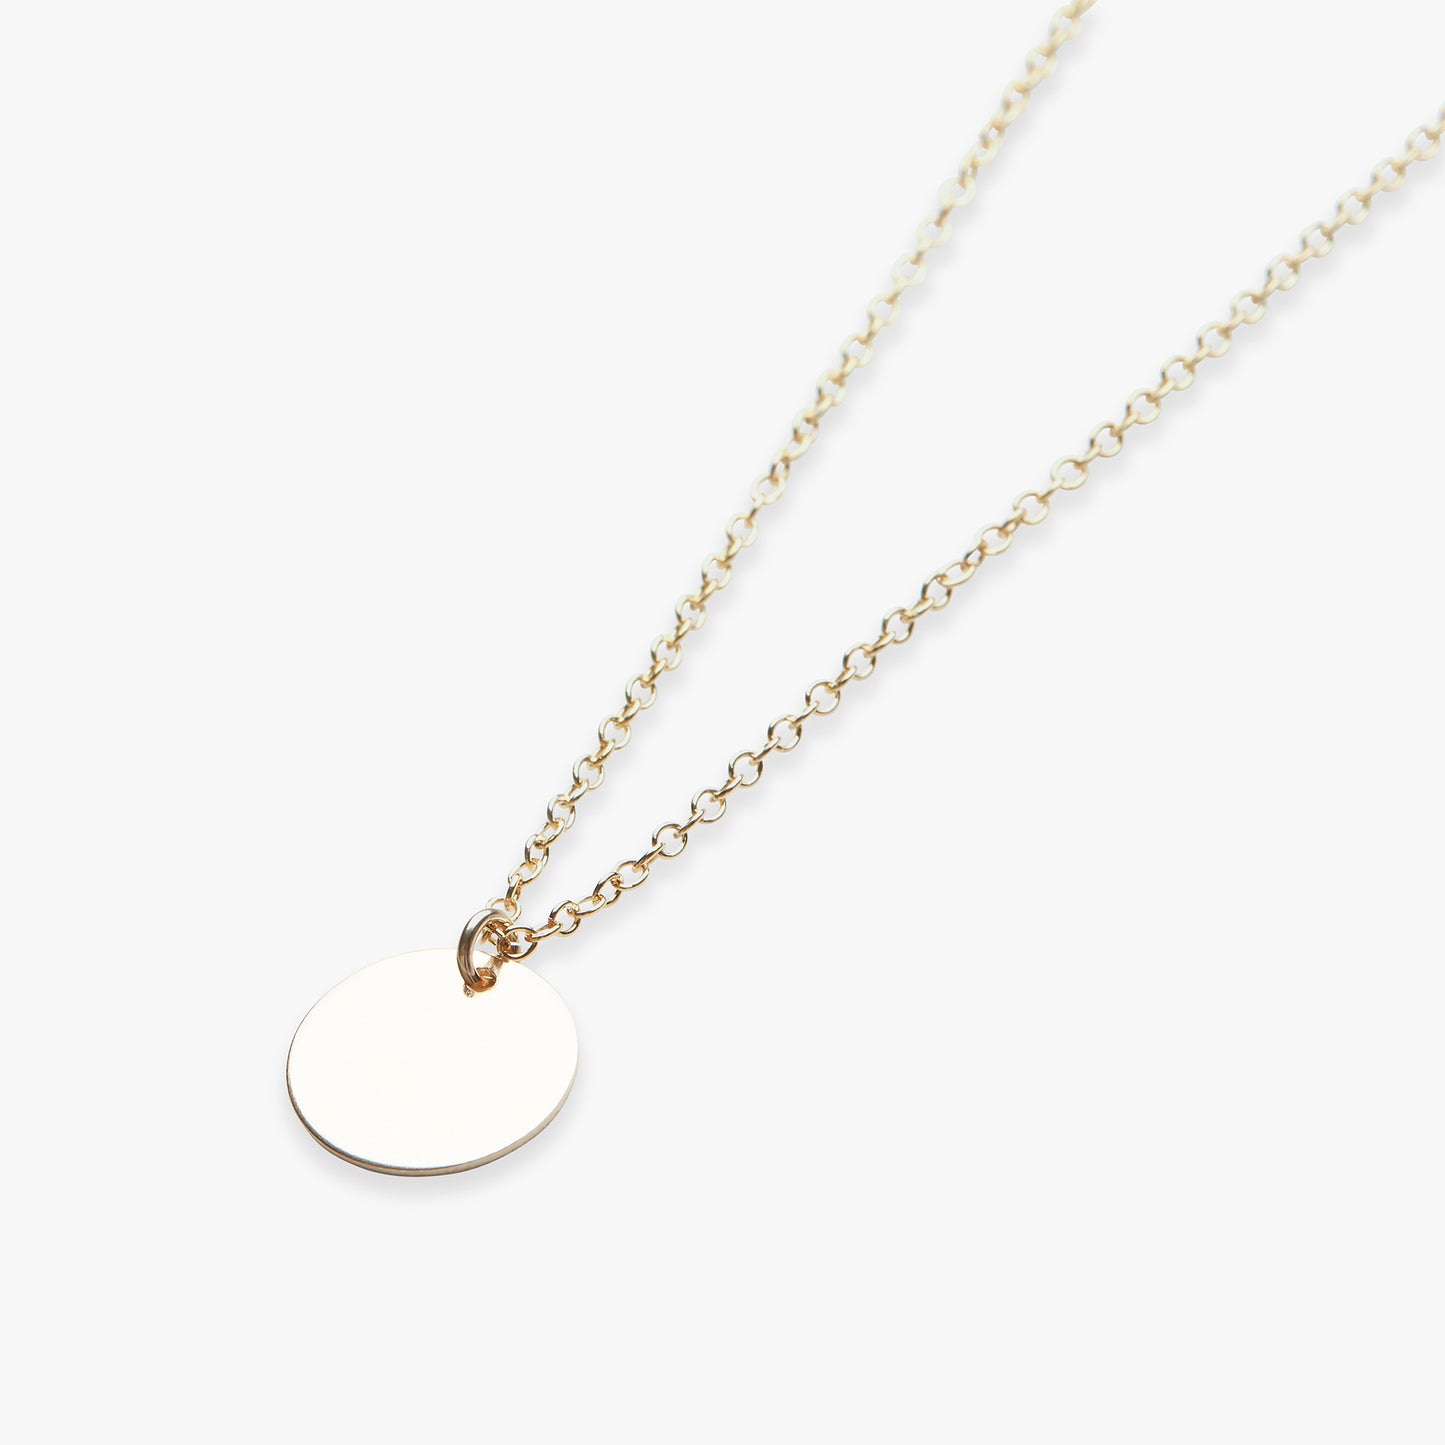 Big coin necklace gold filled